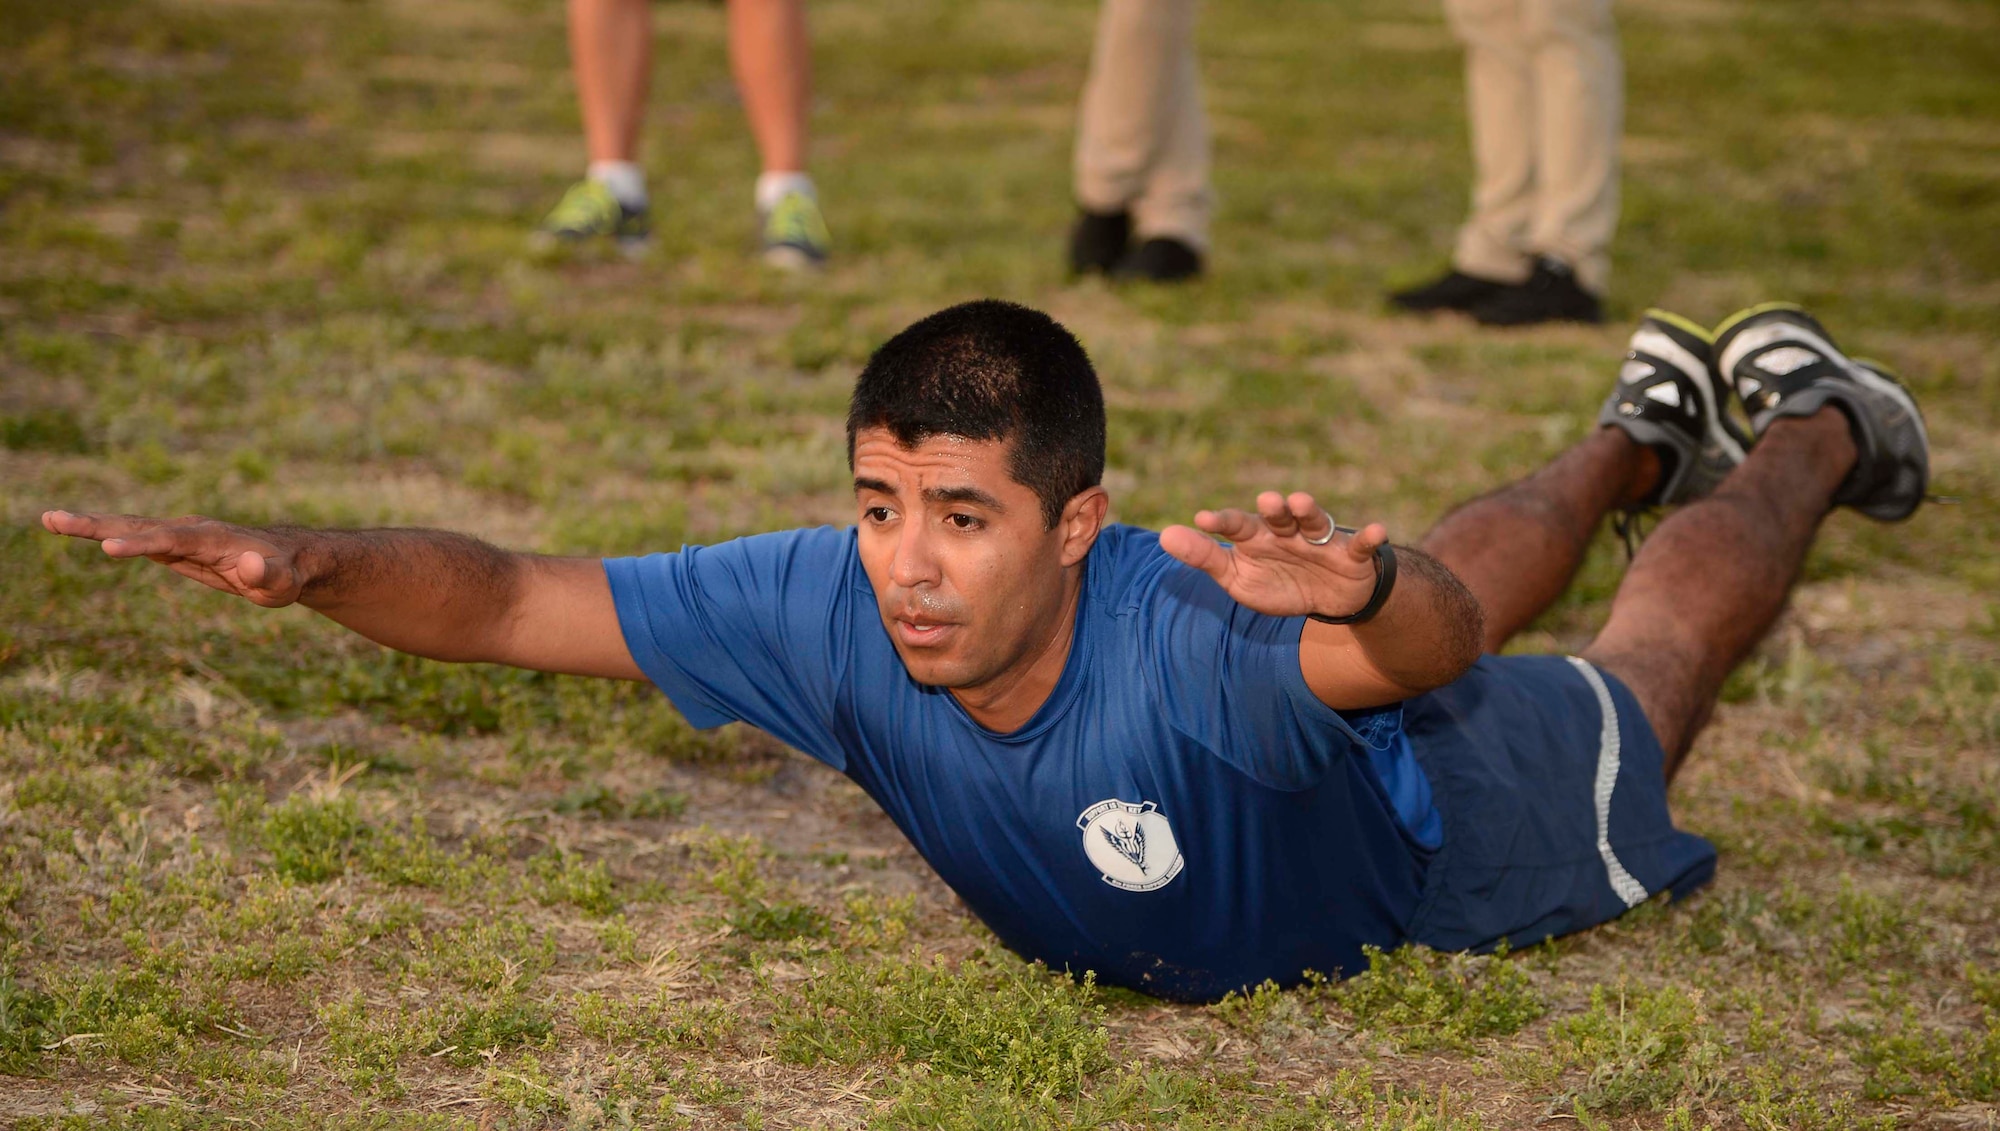 U.S. Air Force Lt. Col. Sergio Rios, commander of the 6th Force Support Squadron, performs a “superman” exercise during an Alpha Warrior Celebrity Workout at MacDill Air Force Base, Fla., April 19, 2017. Members of the Alpha Warrior team visited MacDill as the first stop on the Air Force Alpha Warrior tour. (U.S. Air Force photo by Staff Sgt. Vernon L. Fowler Jr.)